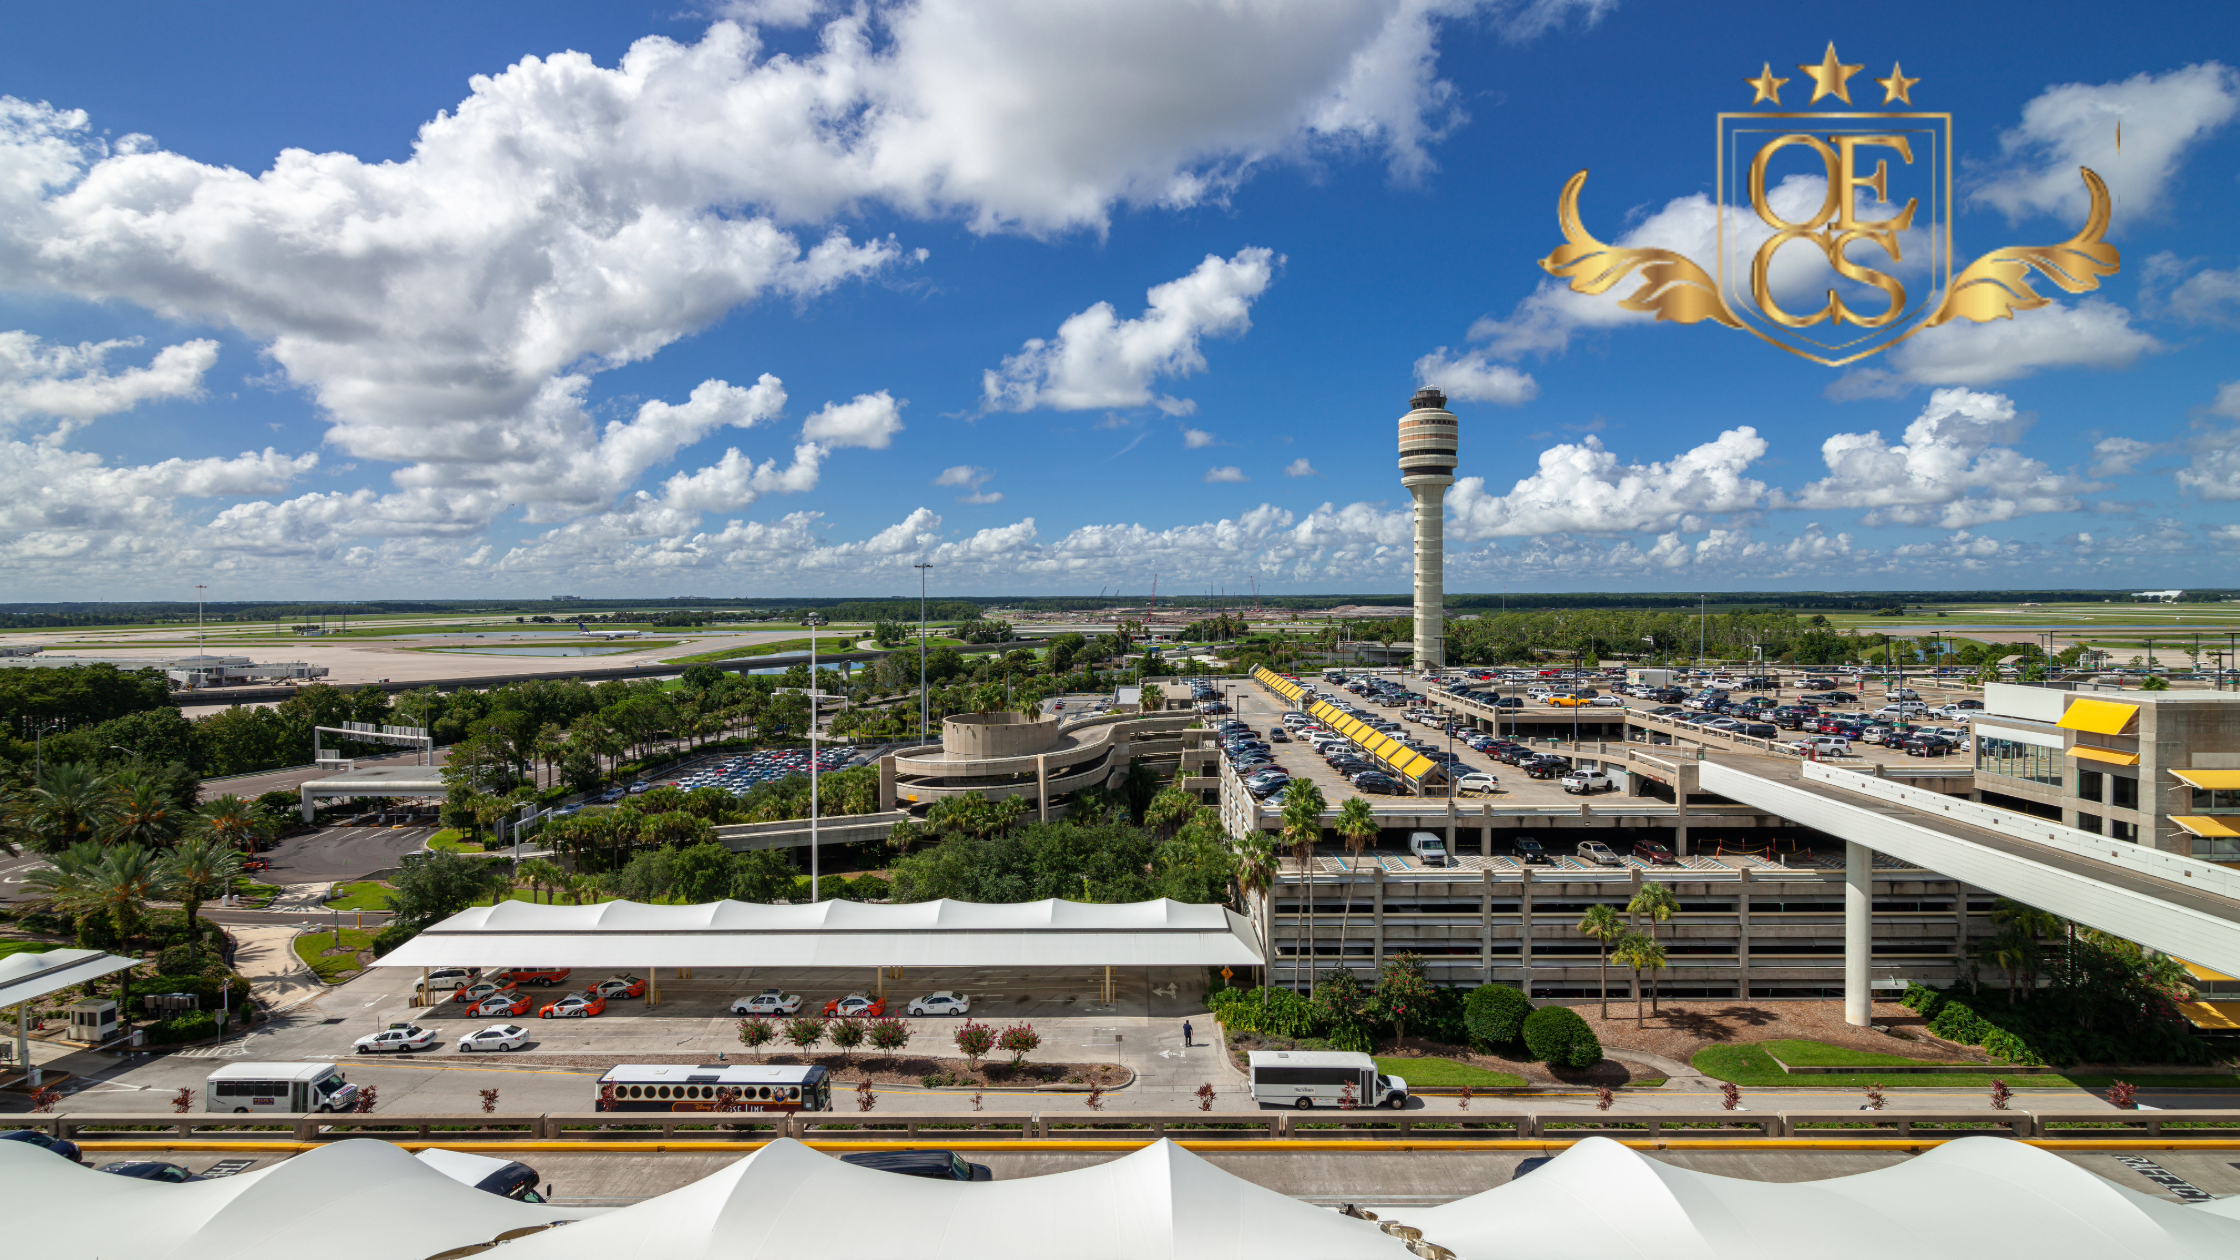 Explore Orlando in luxury with Orlando Executive Car Service. Offering premium airport transfers, group travel, and private tours to top attractions like Disney and Universal.